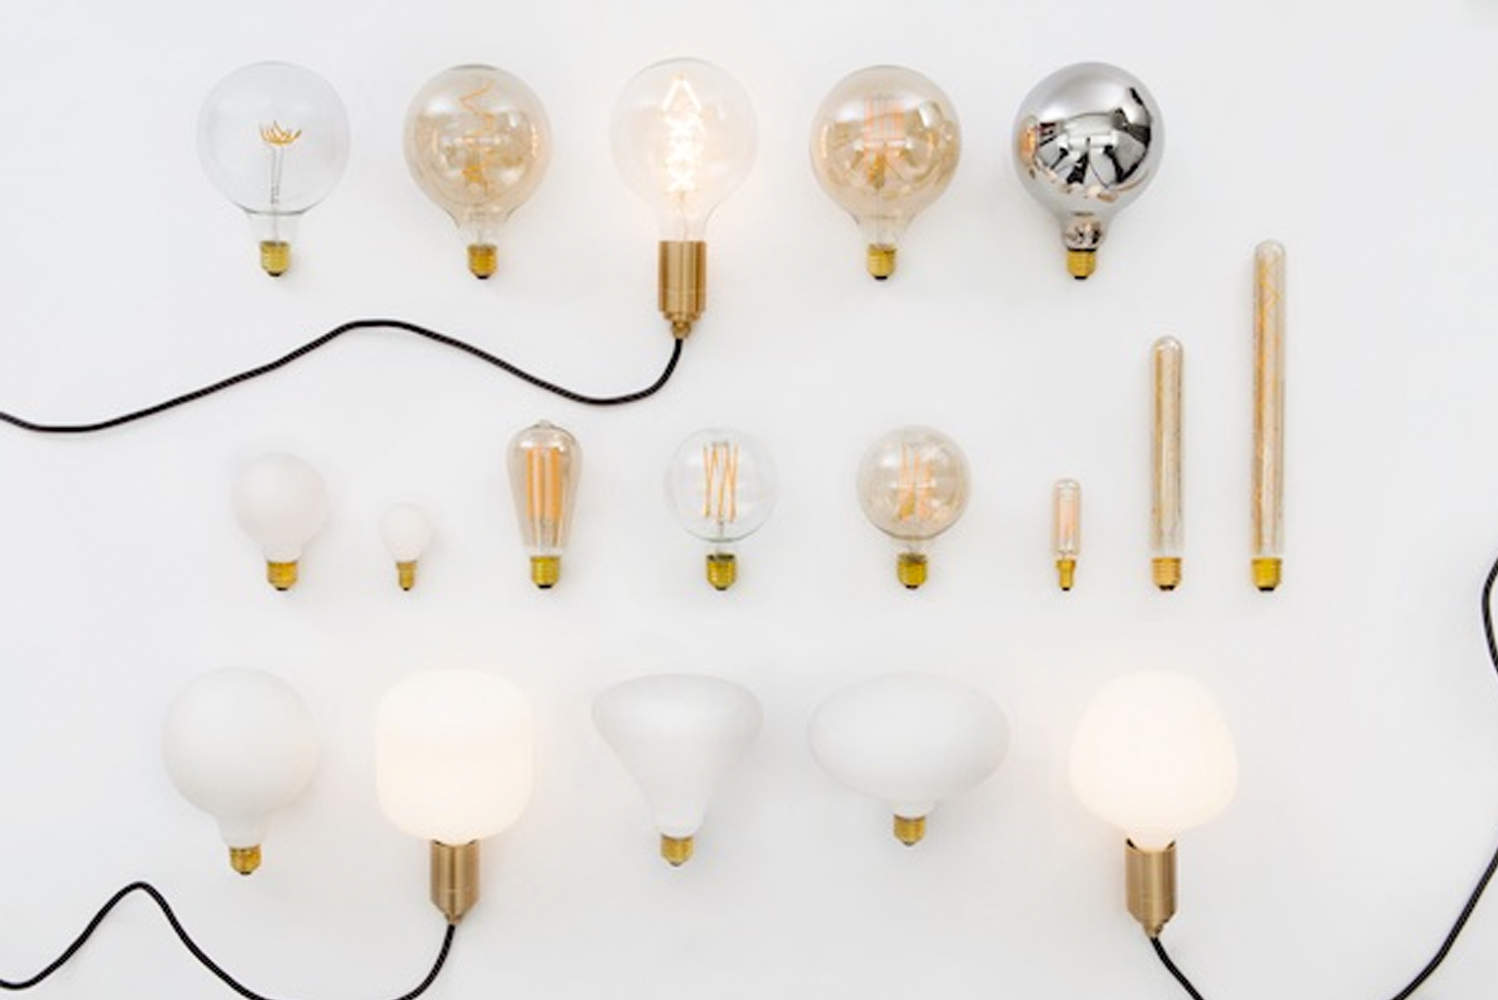 Tala known for making LED bulbs with LED filament structures introduced the Voronoi collection 